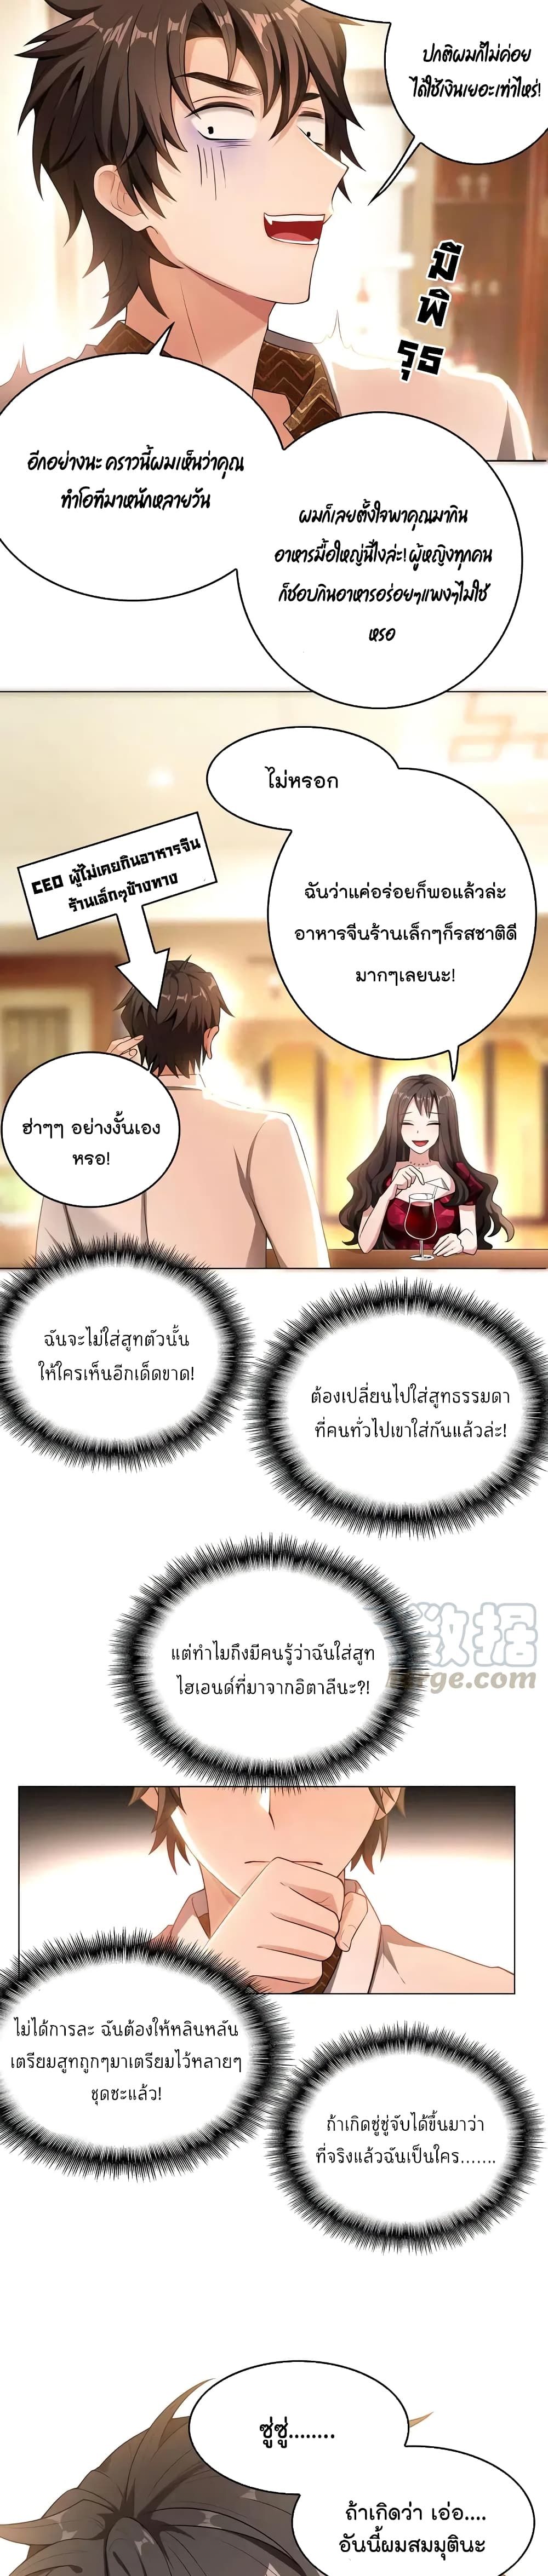 Game of Affection 29 (3)